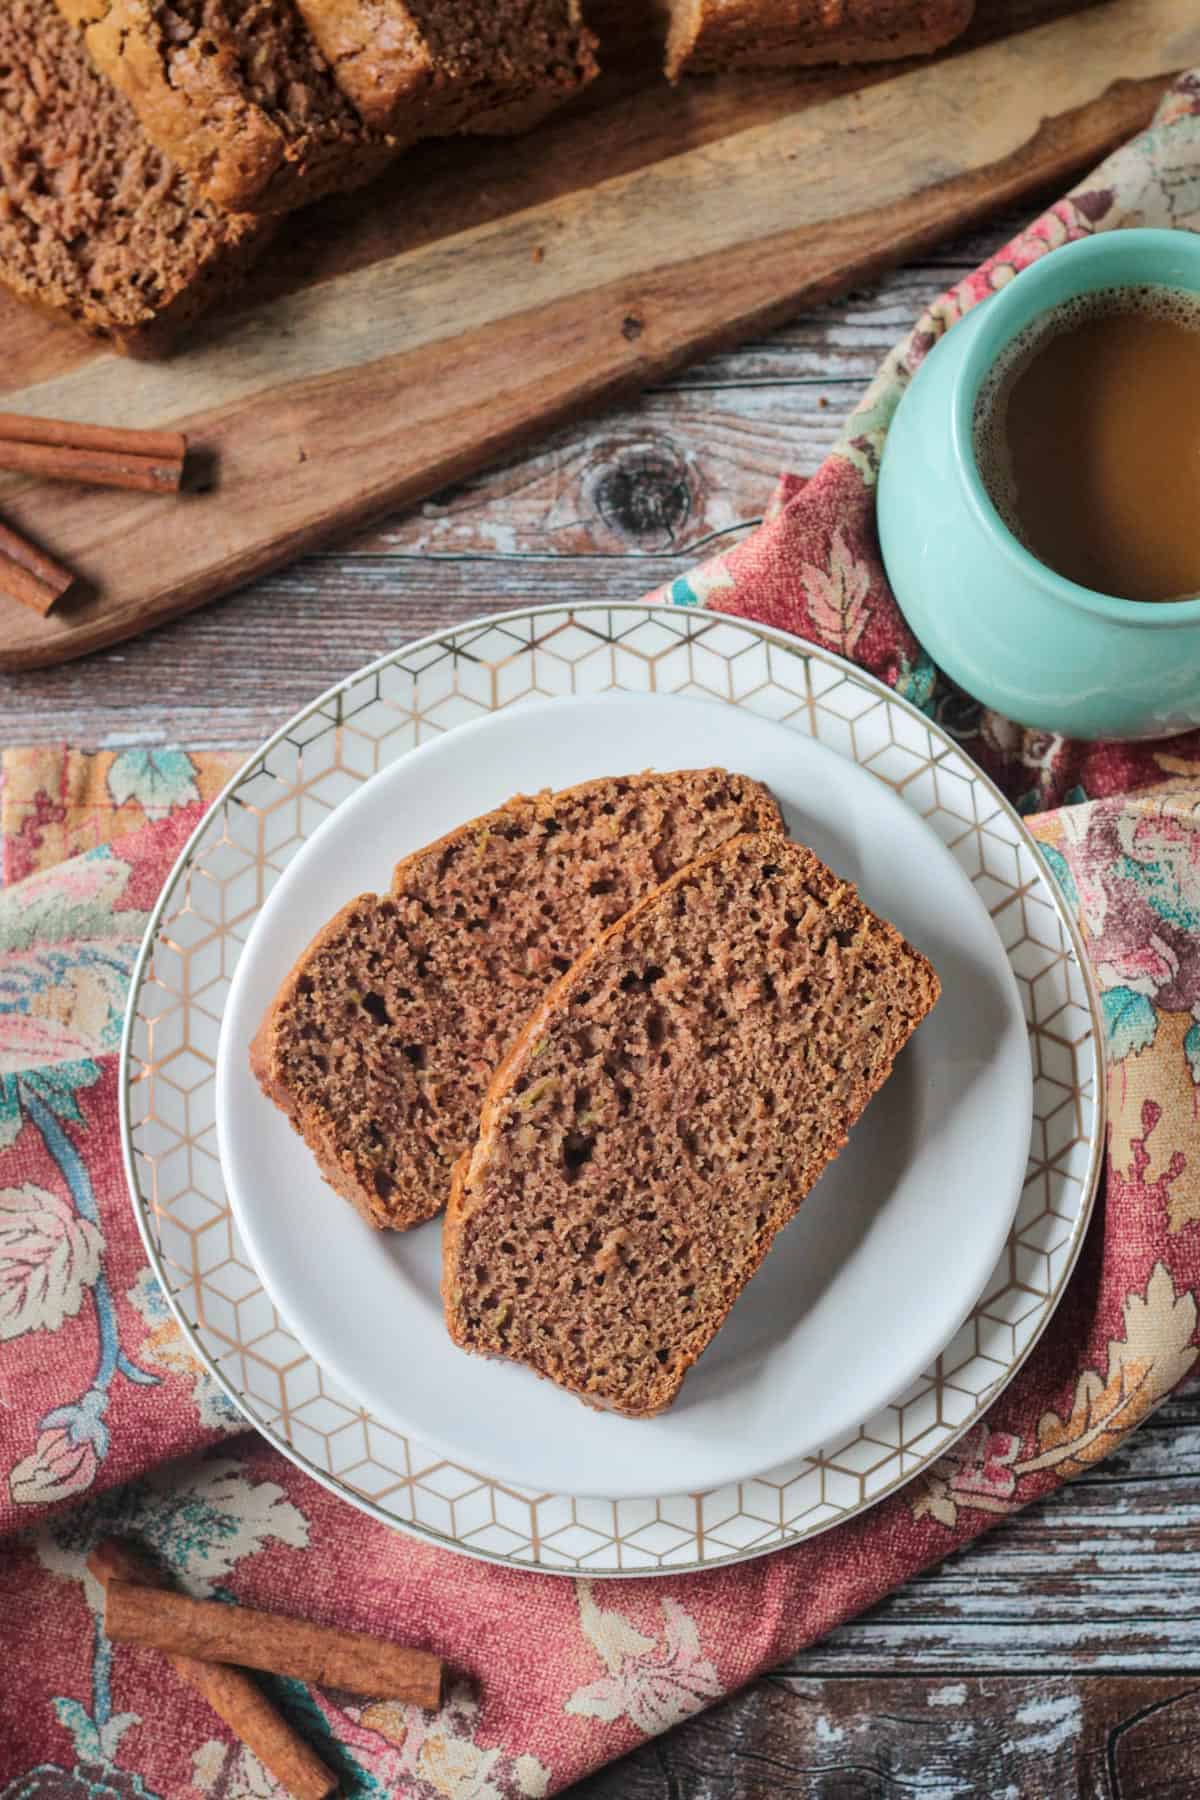 Two slices of apple cinnamon bread on a plate.